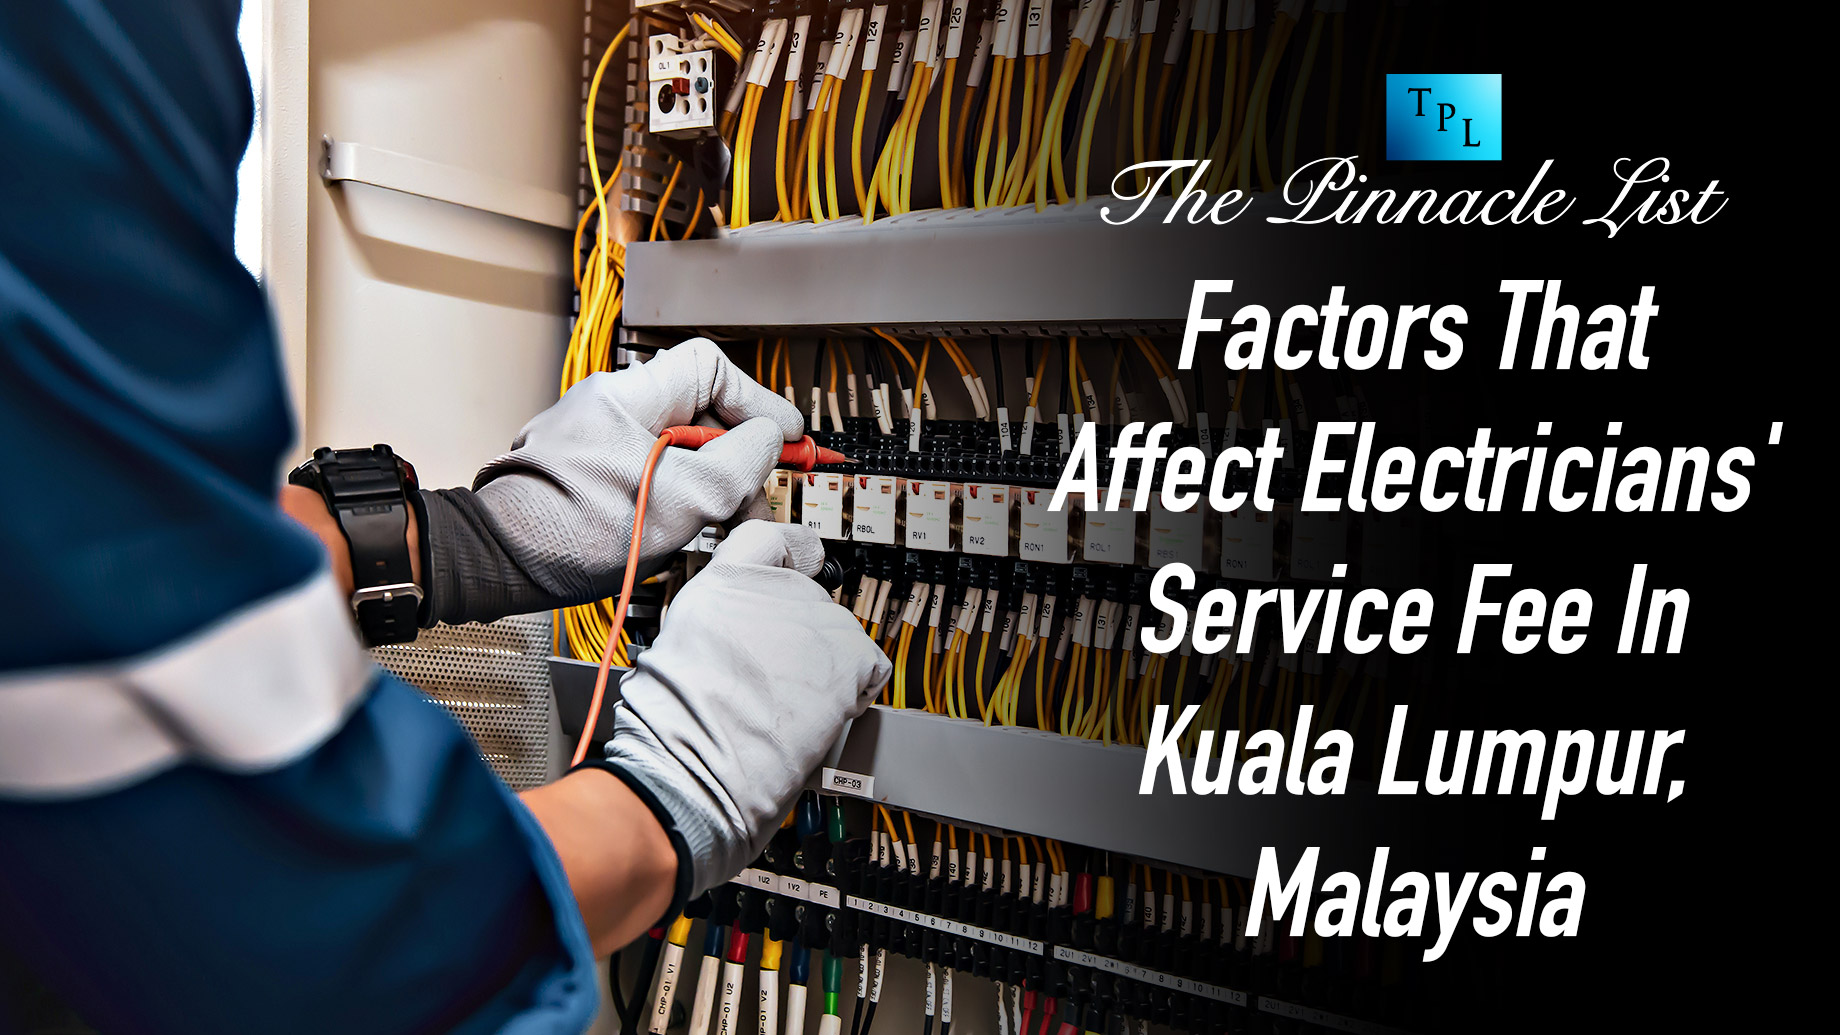 Factors That Affect Electricians' Service Fee In Kuala Lumpur, Malaysia